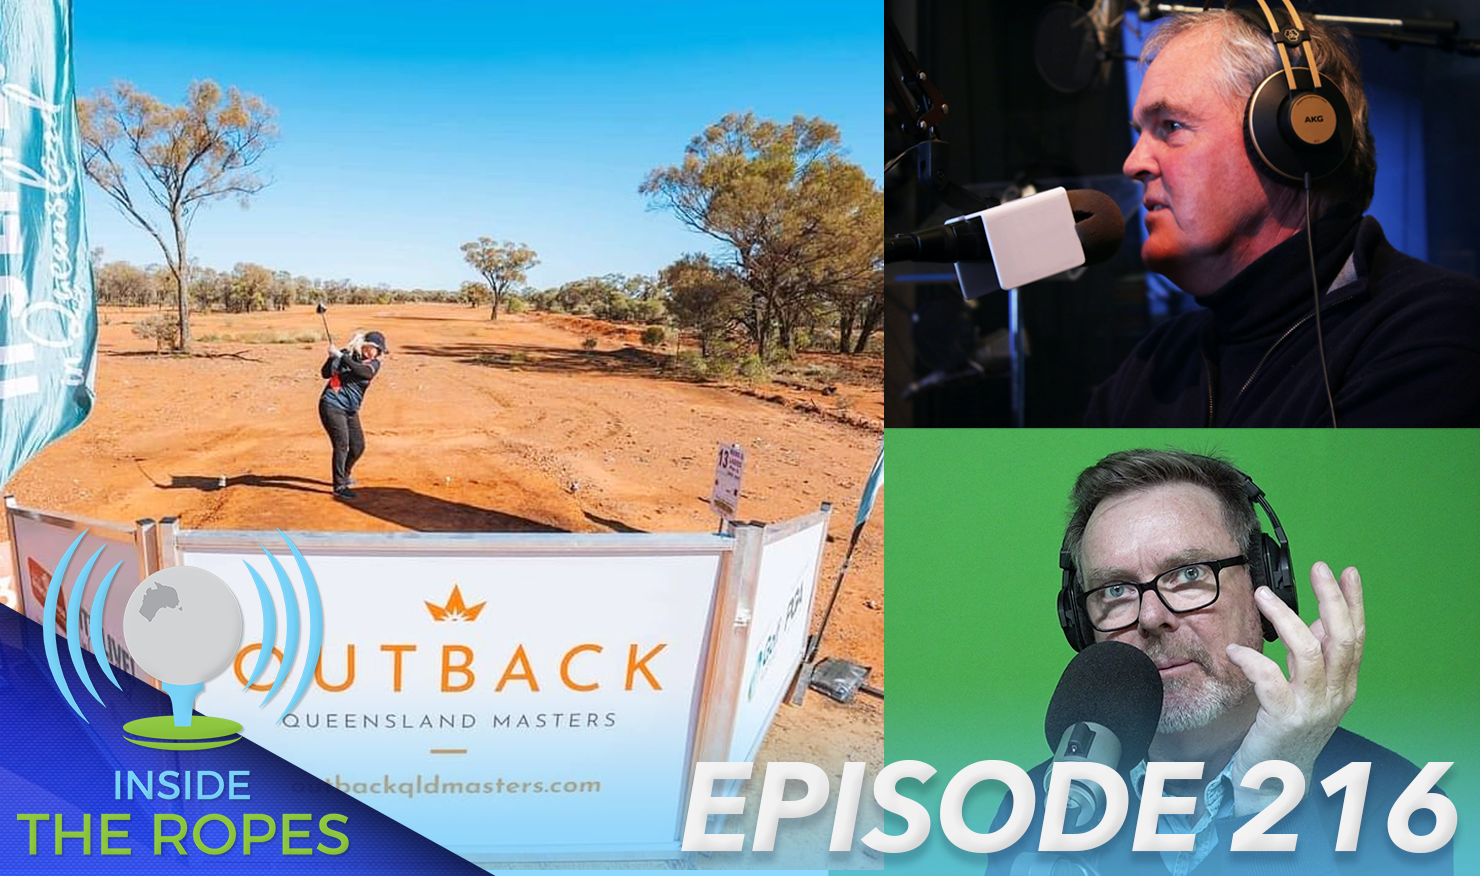 Hosts Martin Blake and Mike Clayton drop in on the Outback Queensland Masters.